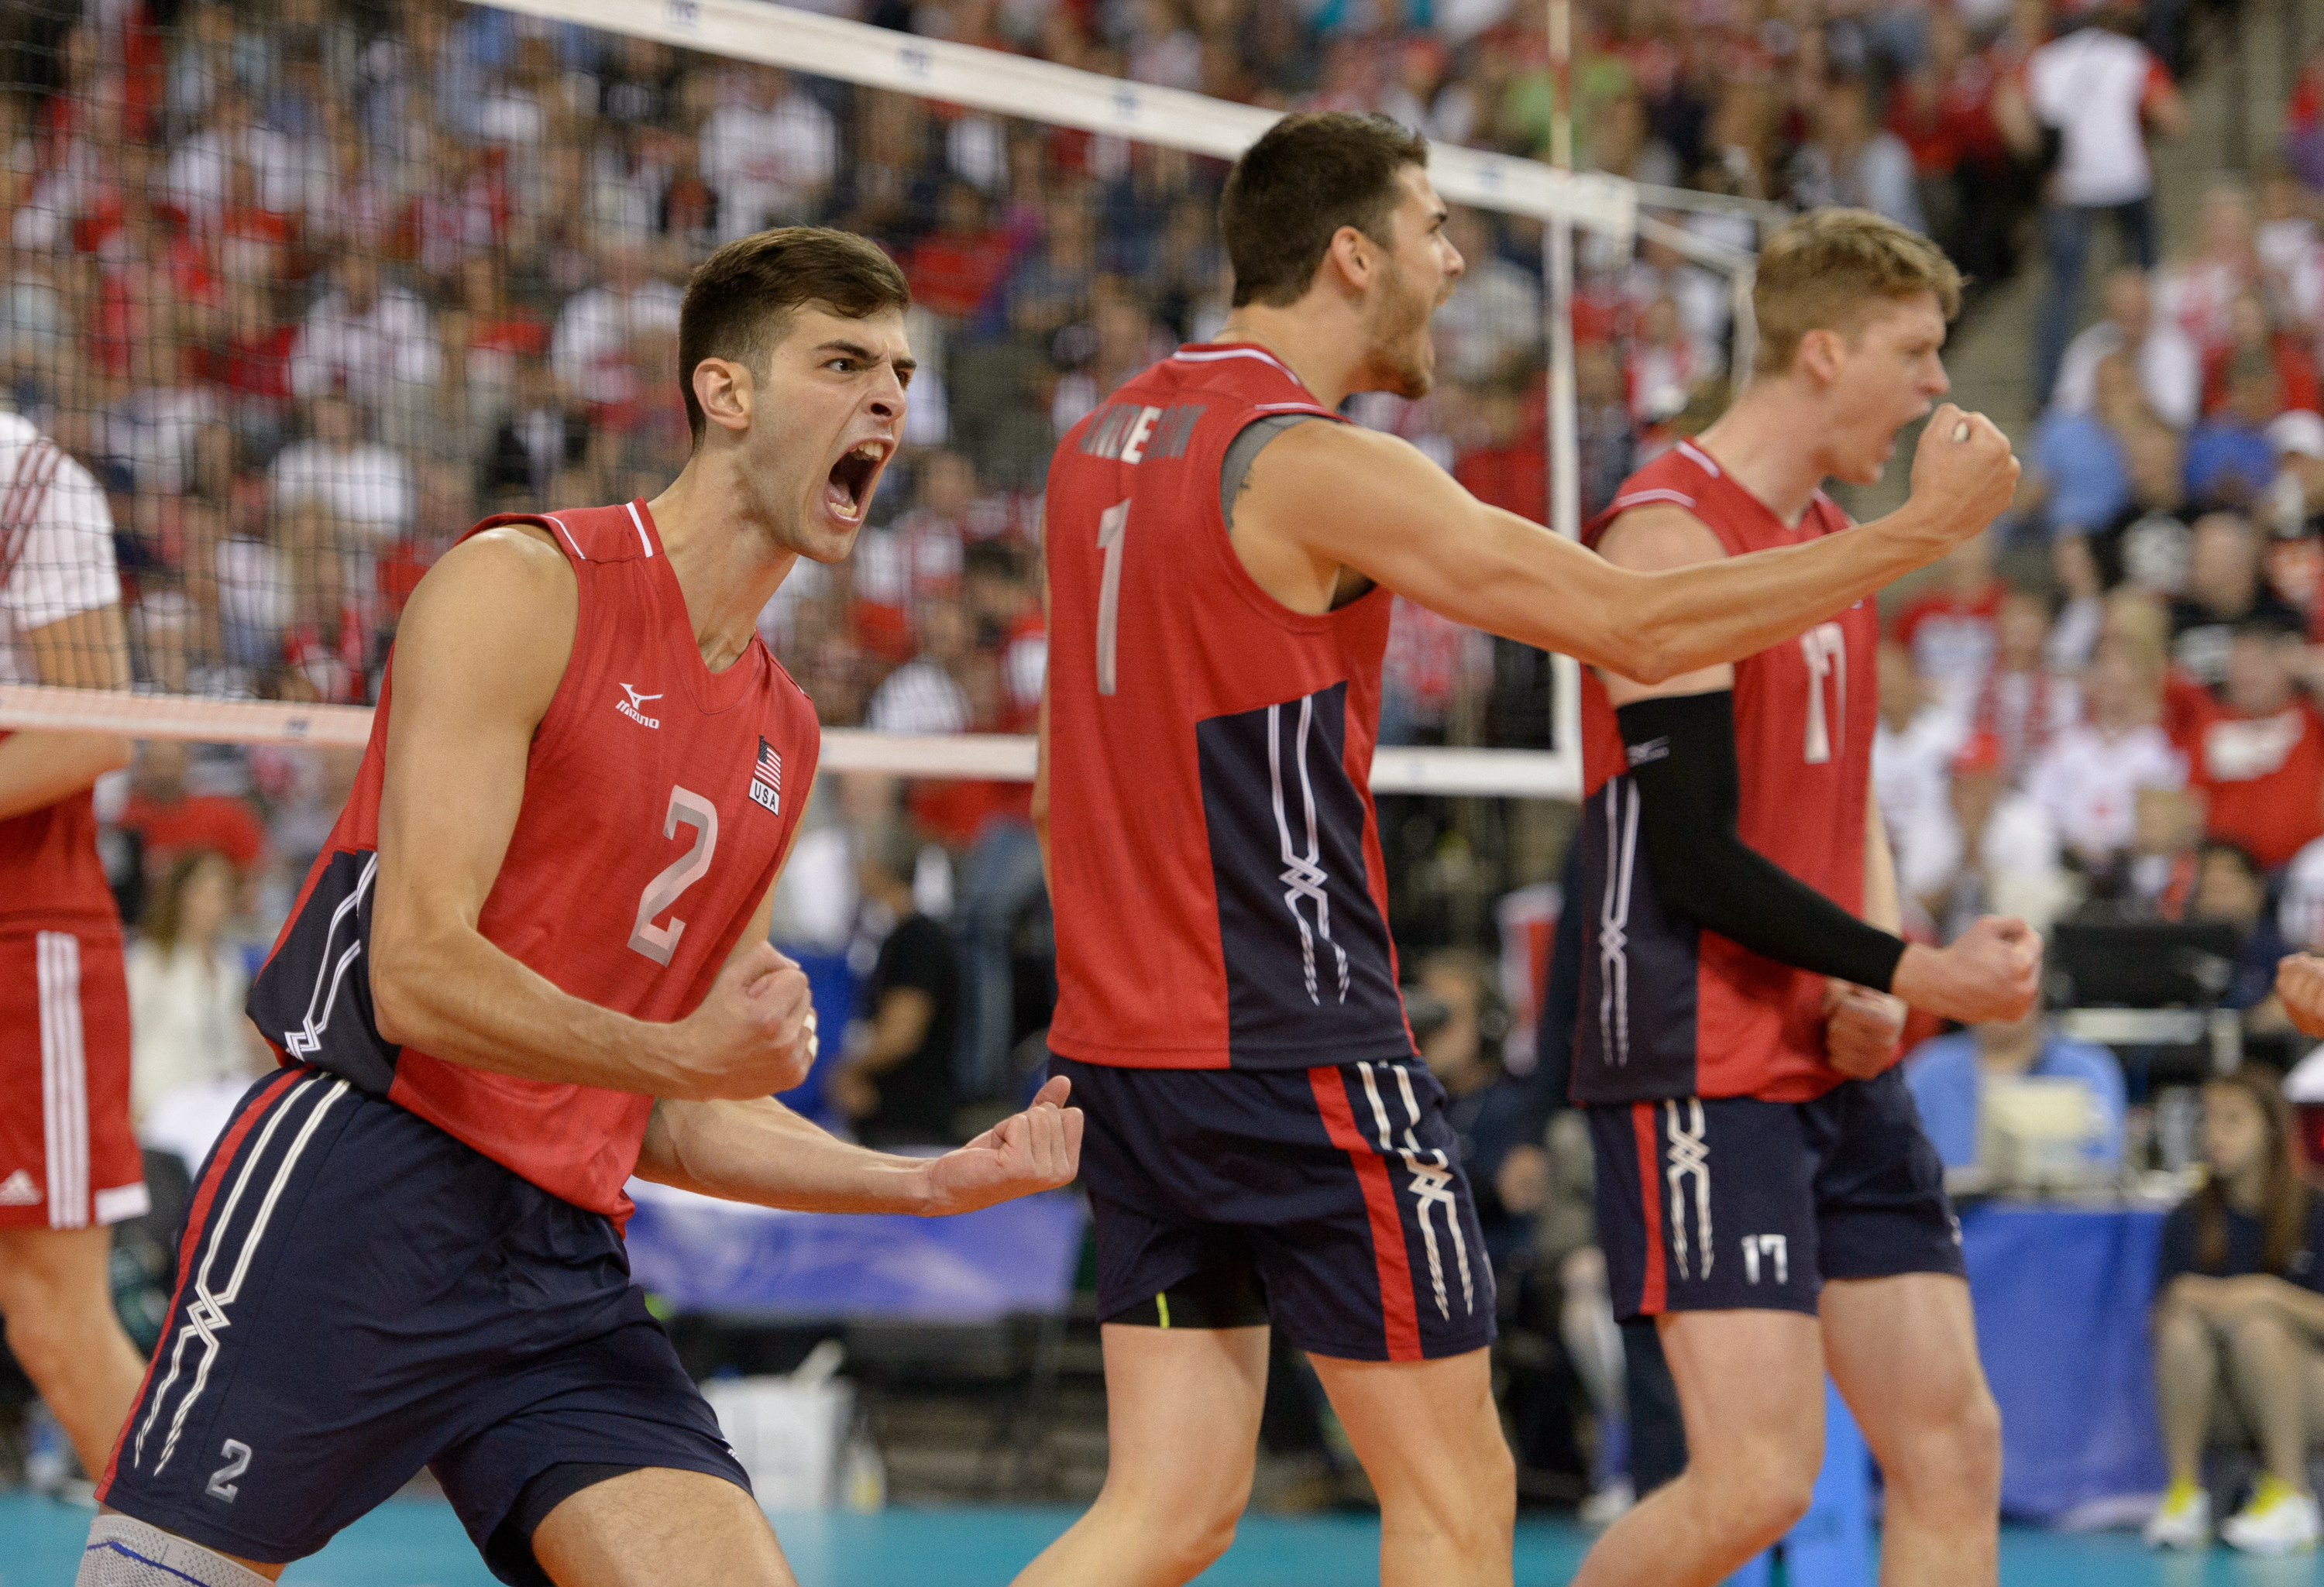 Hoffman Estates, IL, USA, June 12, 2015:  USA’s Aaron Russell (2) during a FIVB Men's Volleyball World League match between the United States and Poland at the Sears Centre Arena. Photographer: Daniel Bartel